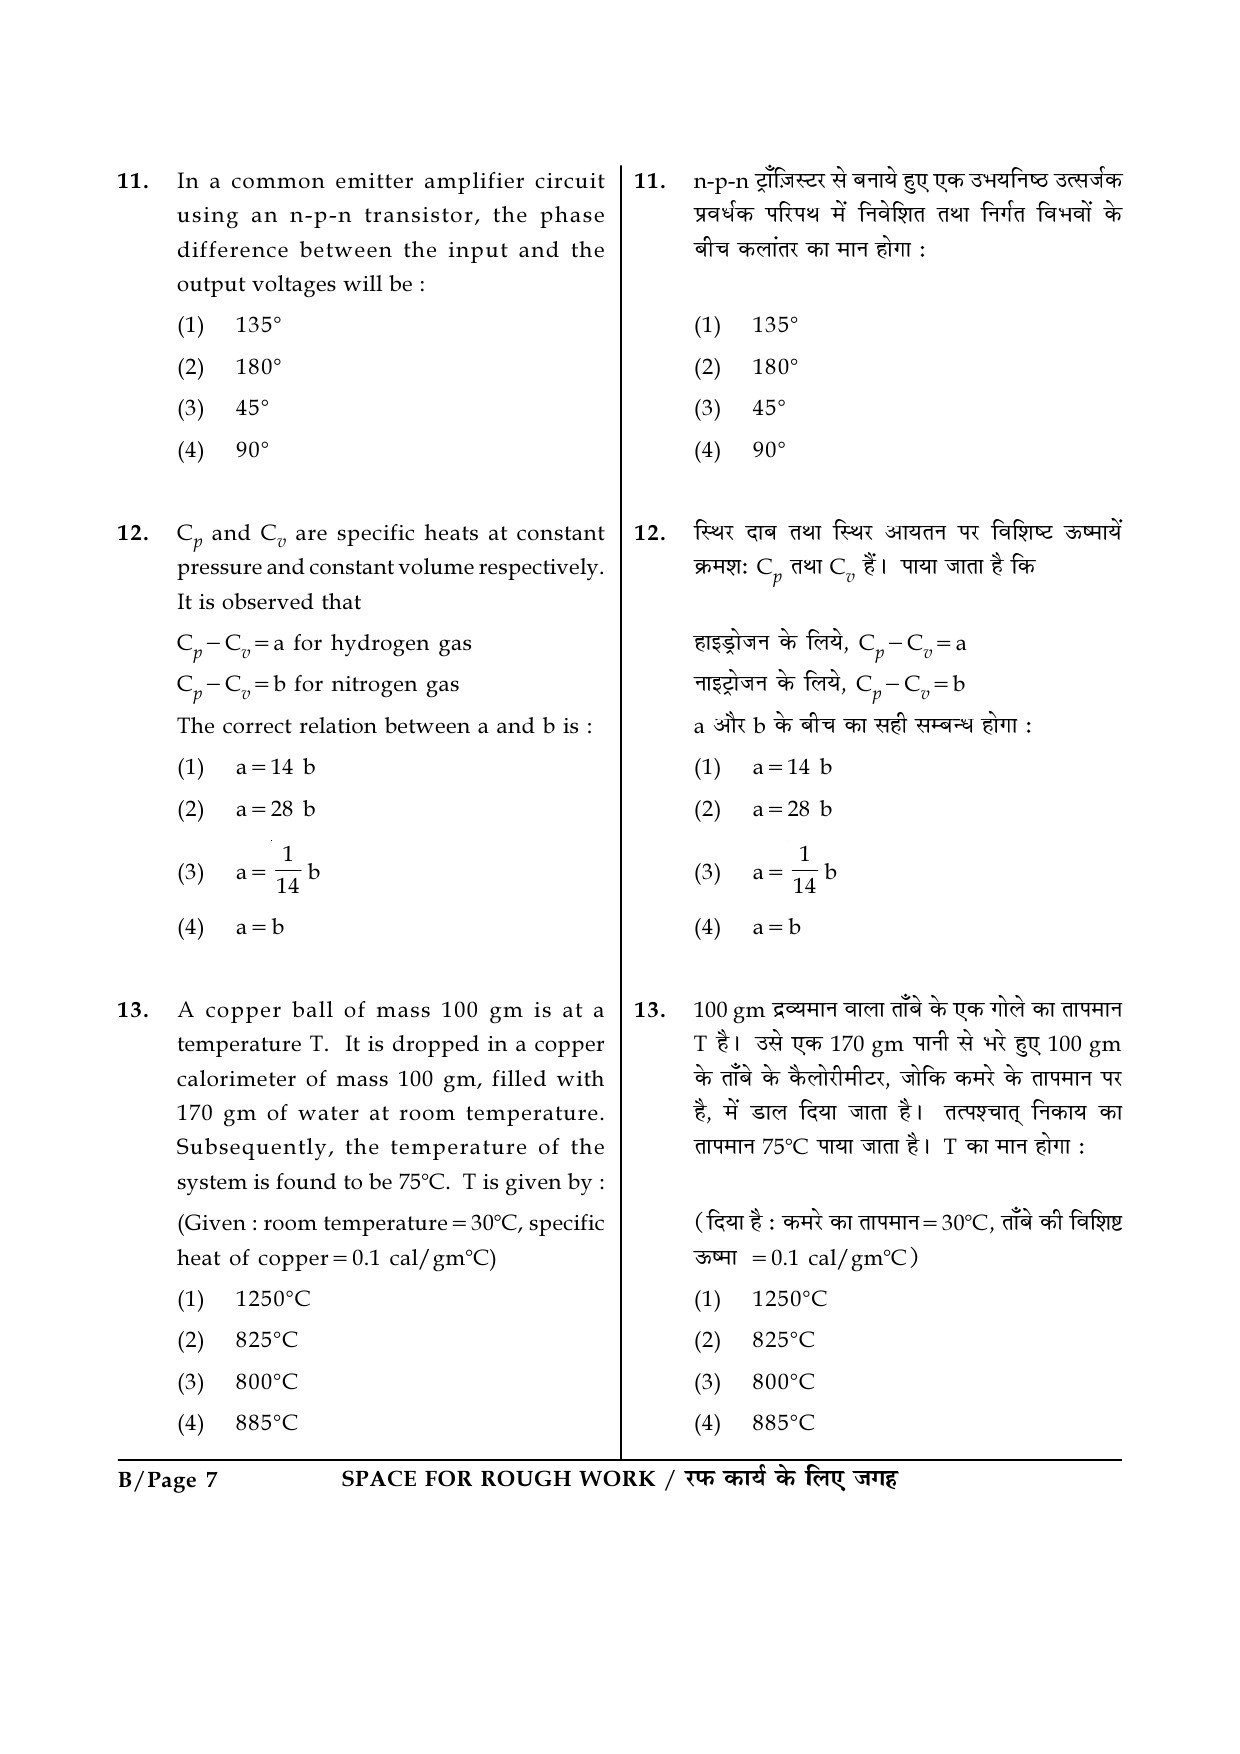 JEE Main Exam Question Paper 2017 Booklet B 7